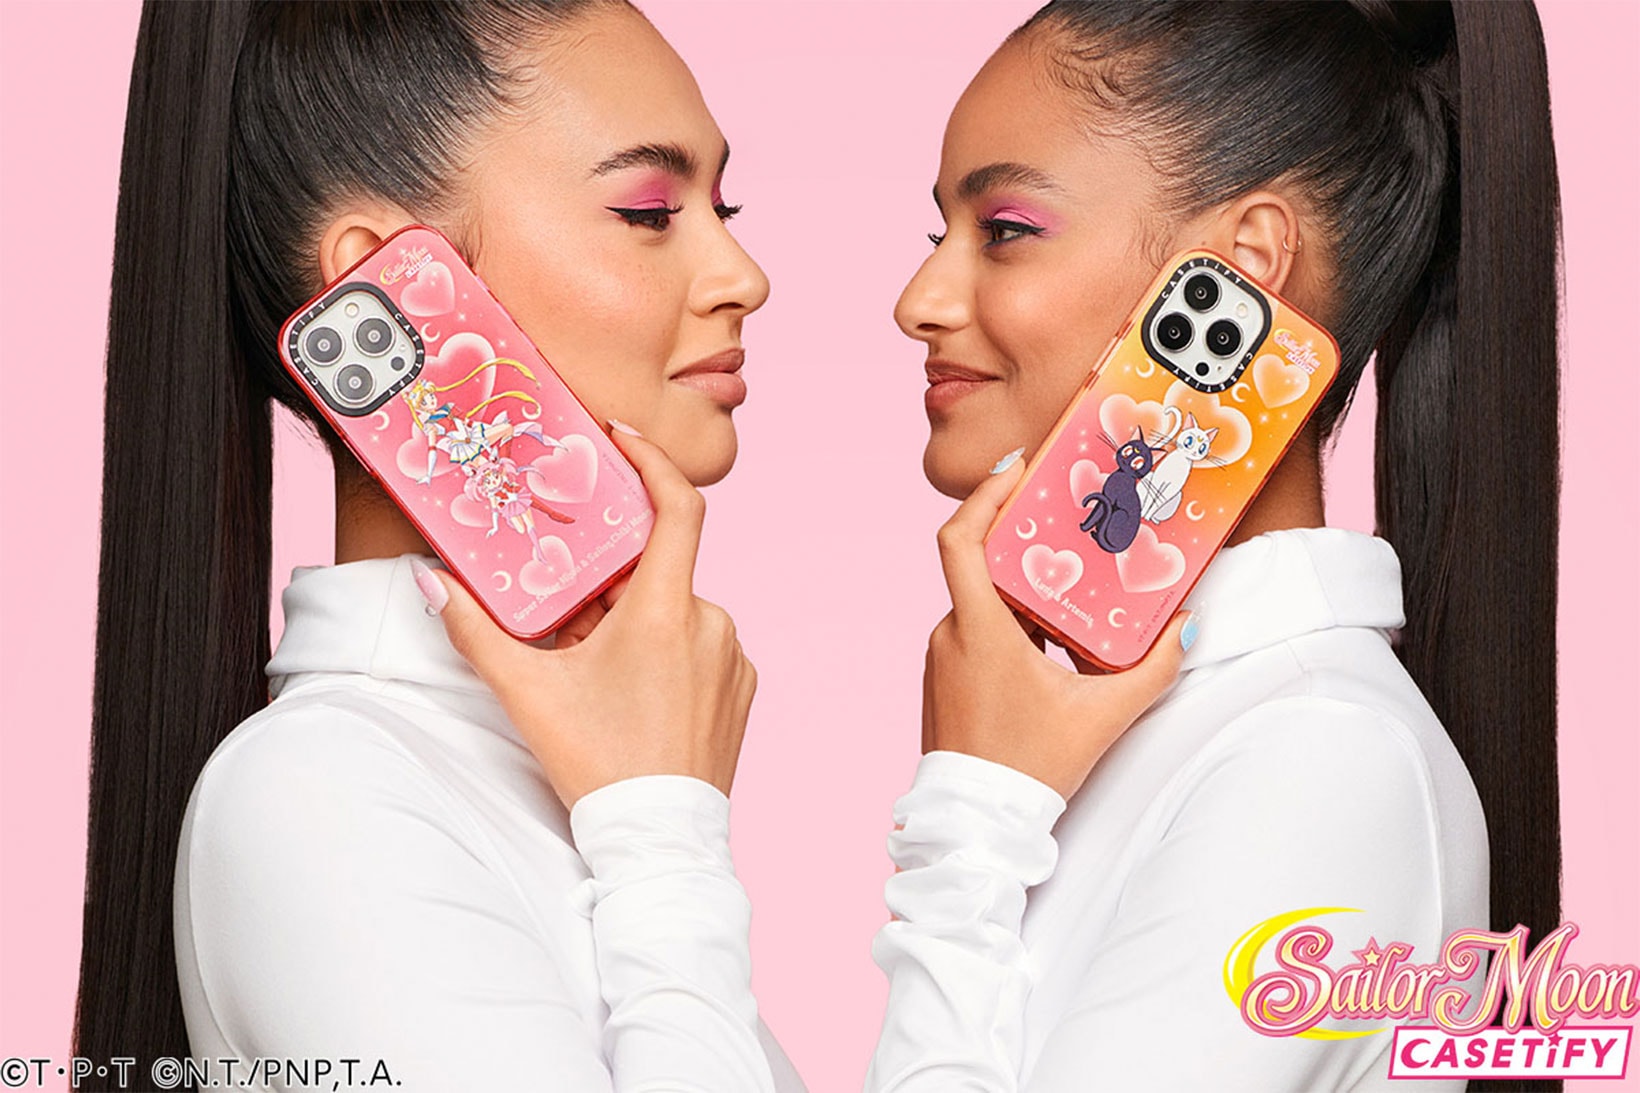 Sailor Moon Casetify iPhone Cases Apple Galaxy Accessories Release Date Info